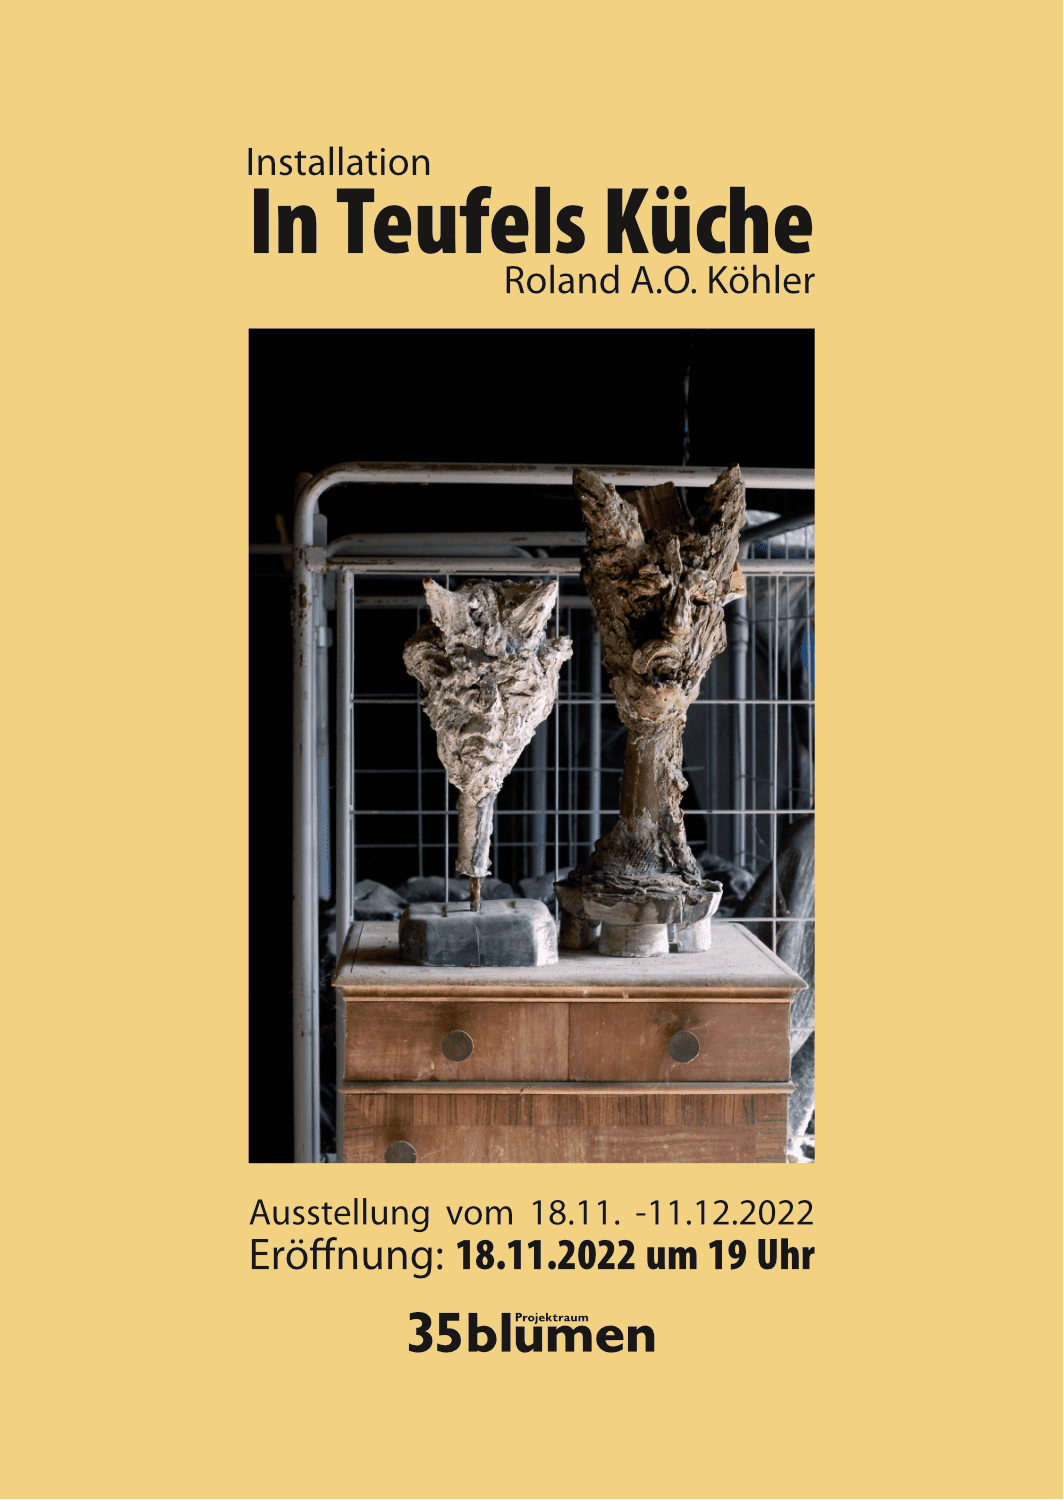 You are currently viewing 35blumen – Roland A.O. Köhler, Installation “In Teufels Küche”